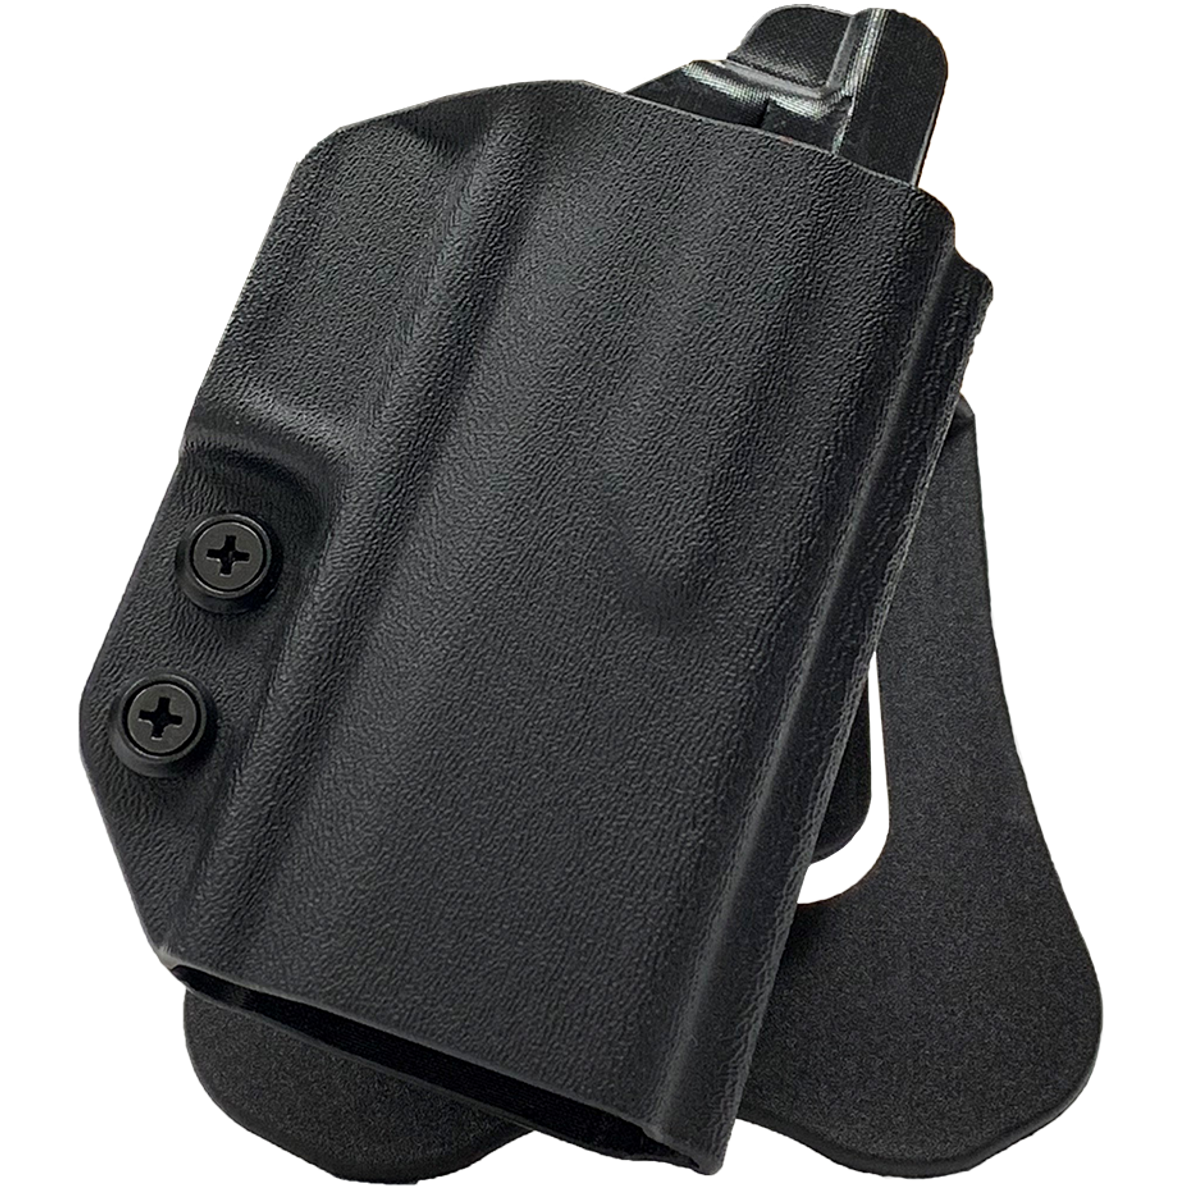 Byrna Kydex Waistband Non-Lethal Projectile Gun Holster